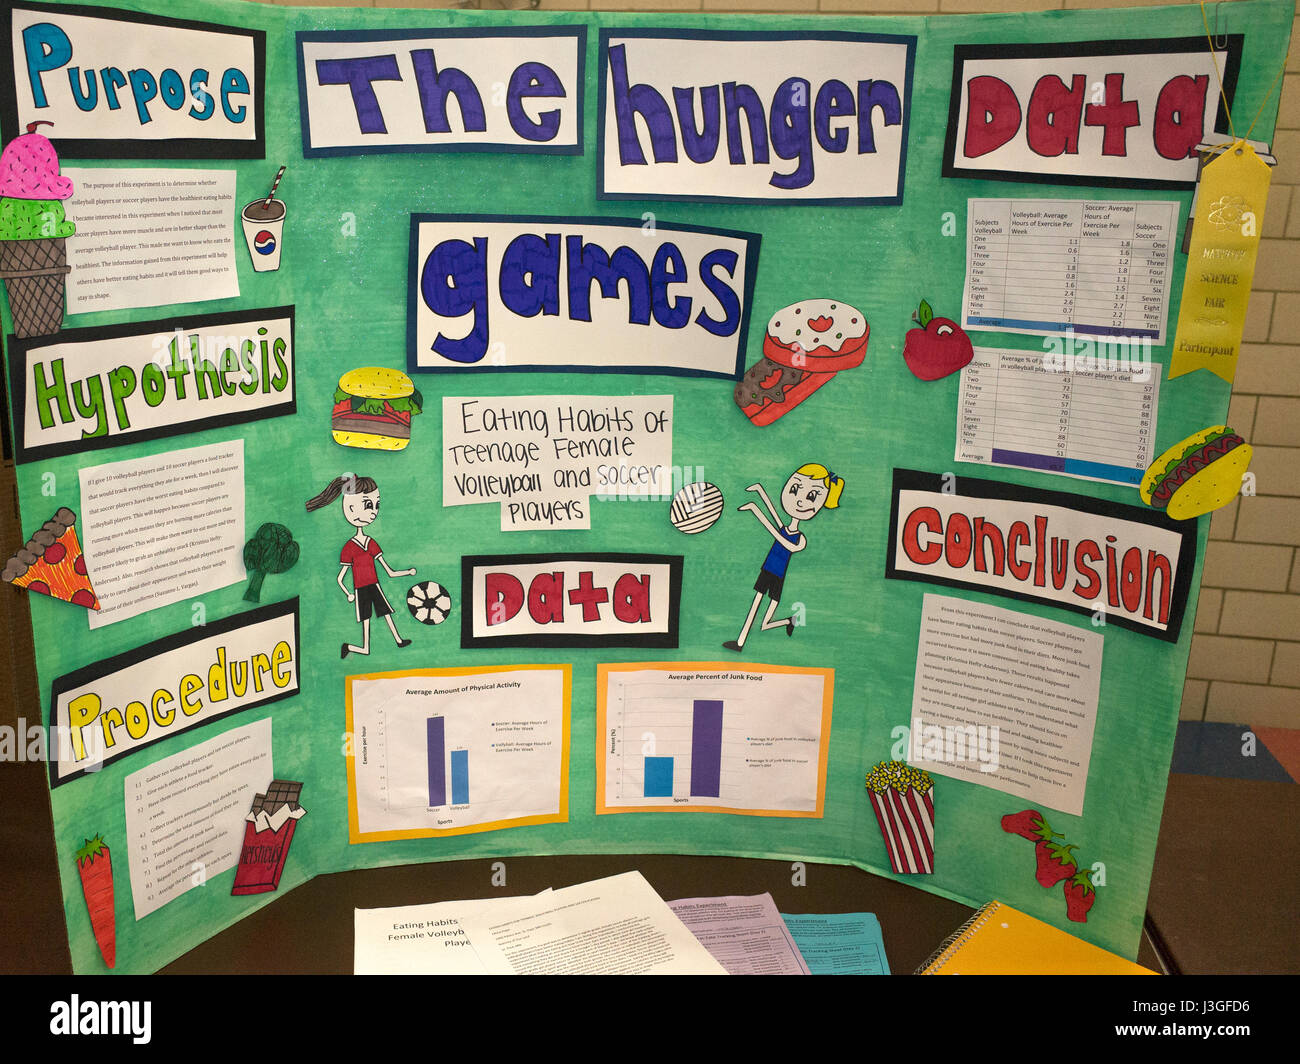 Science poster project on the eating habits of junior high school women volleyball and soccer athletes. St Paul Minnesota MN USA Stock Photo